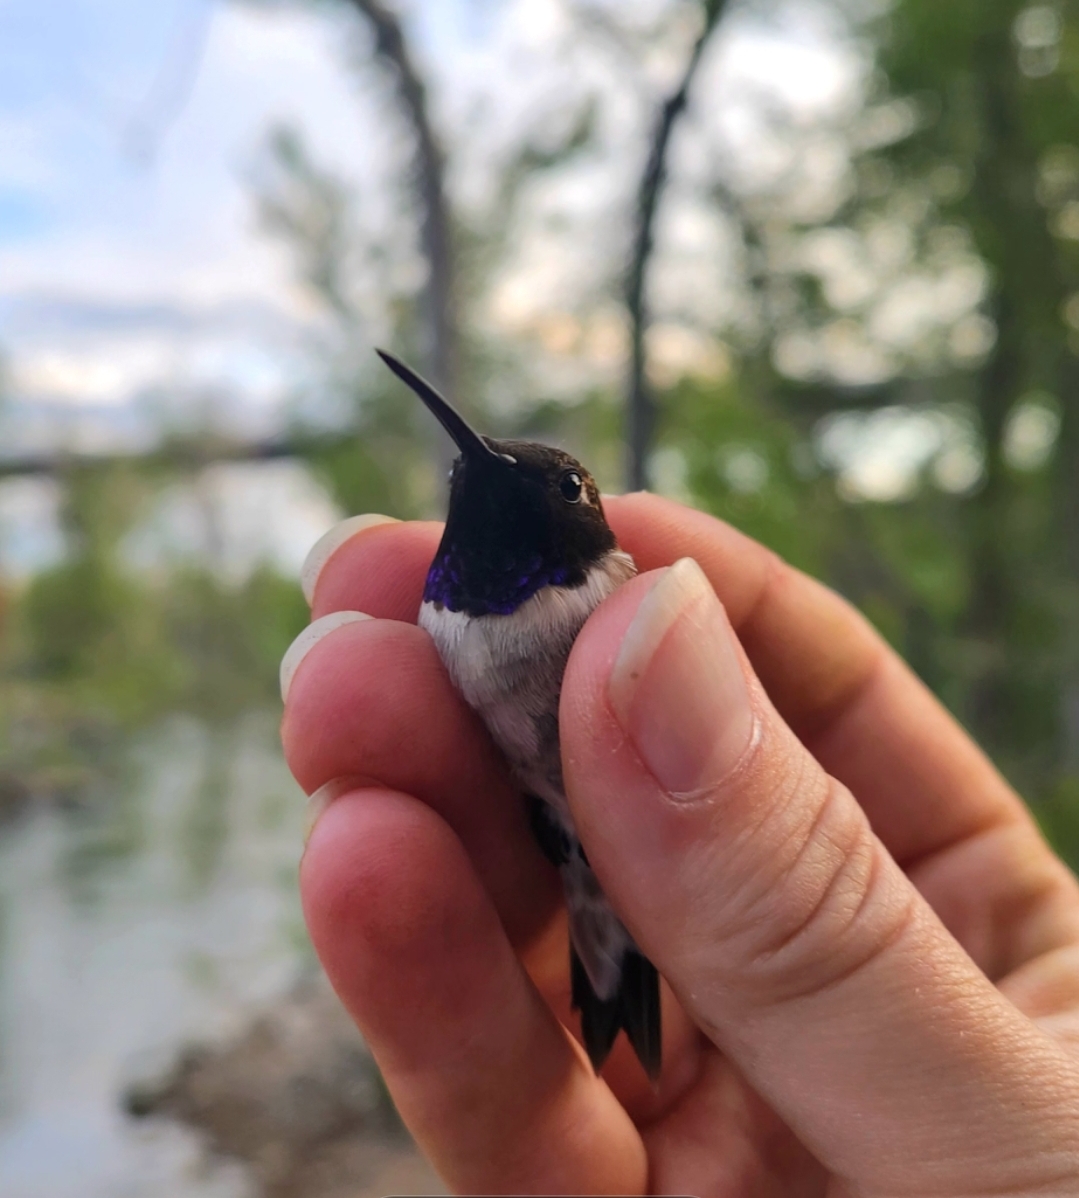 a black-chinned hummingbird looks toward the camera. He is held carefully between the thumb and fingers of the biologist. His tiny head is the size of the biologist's index fingernail.